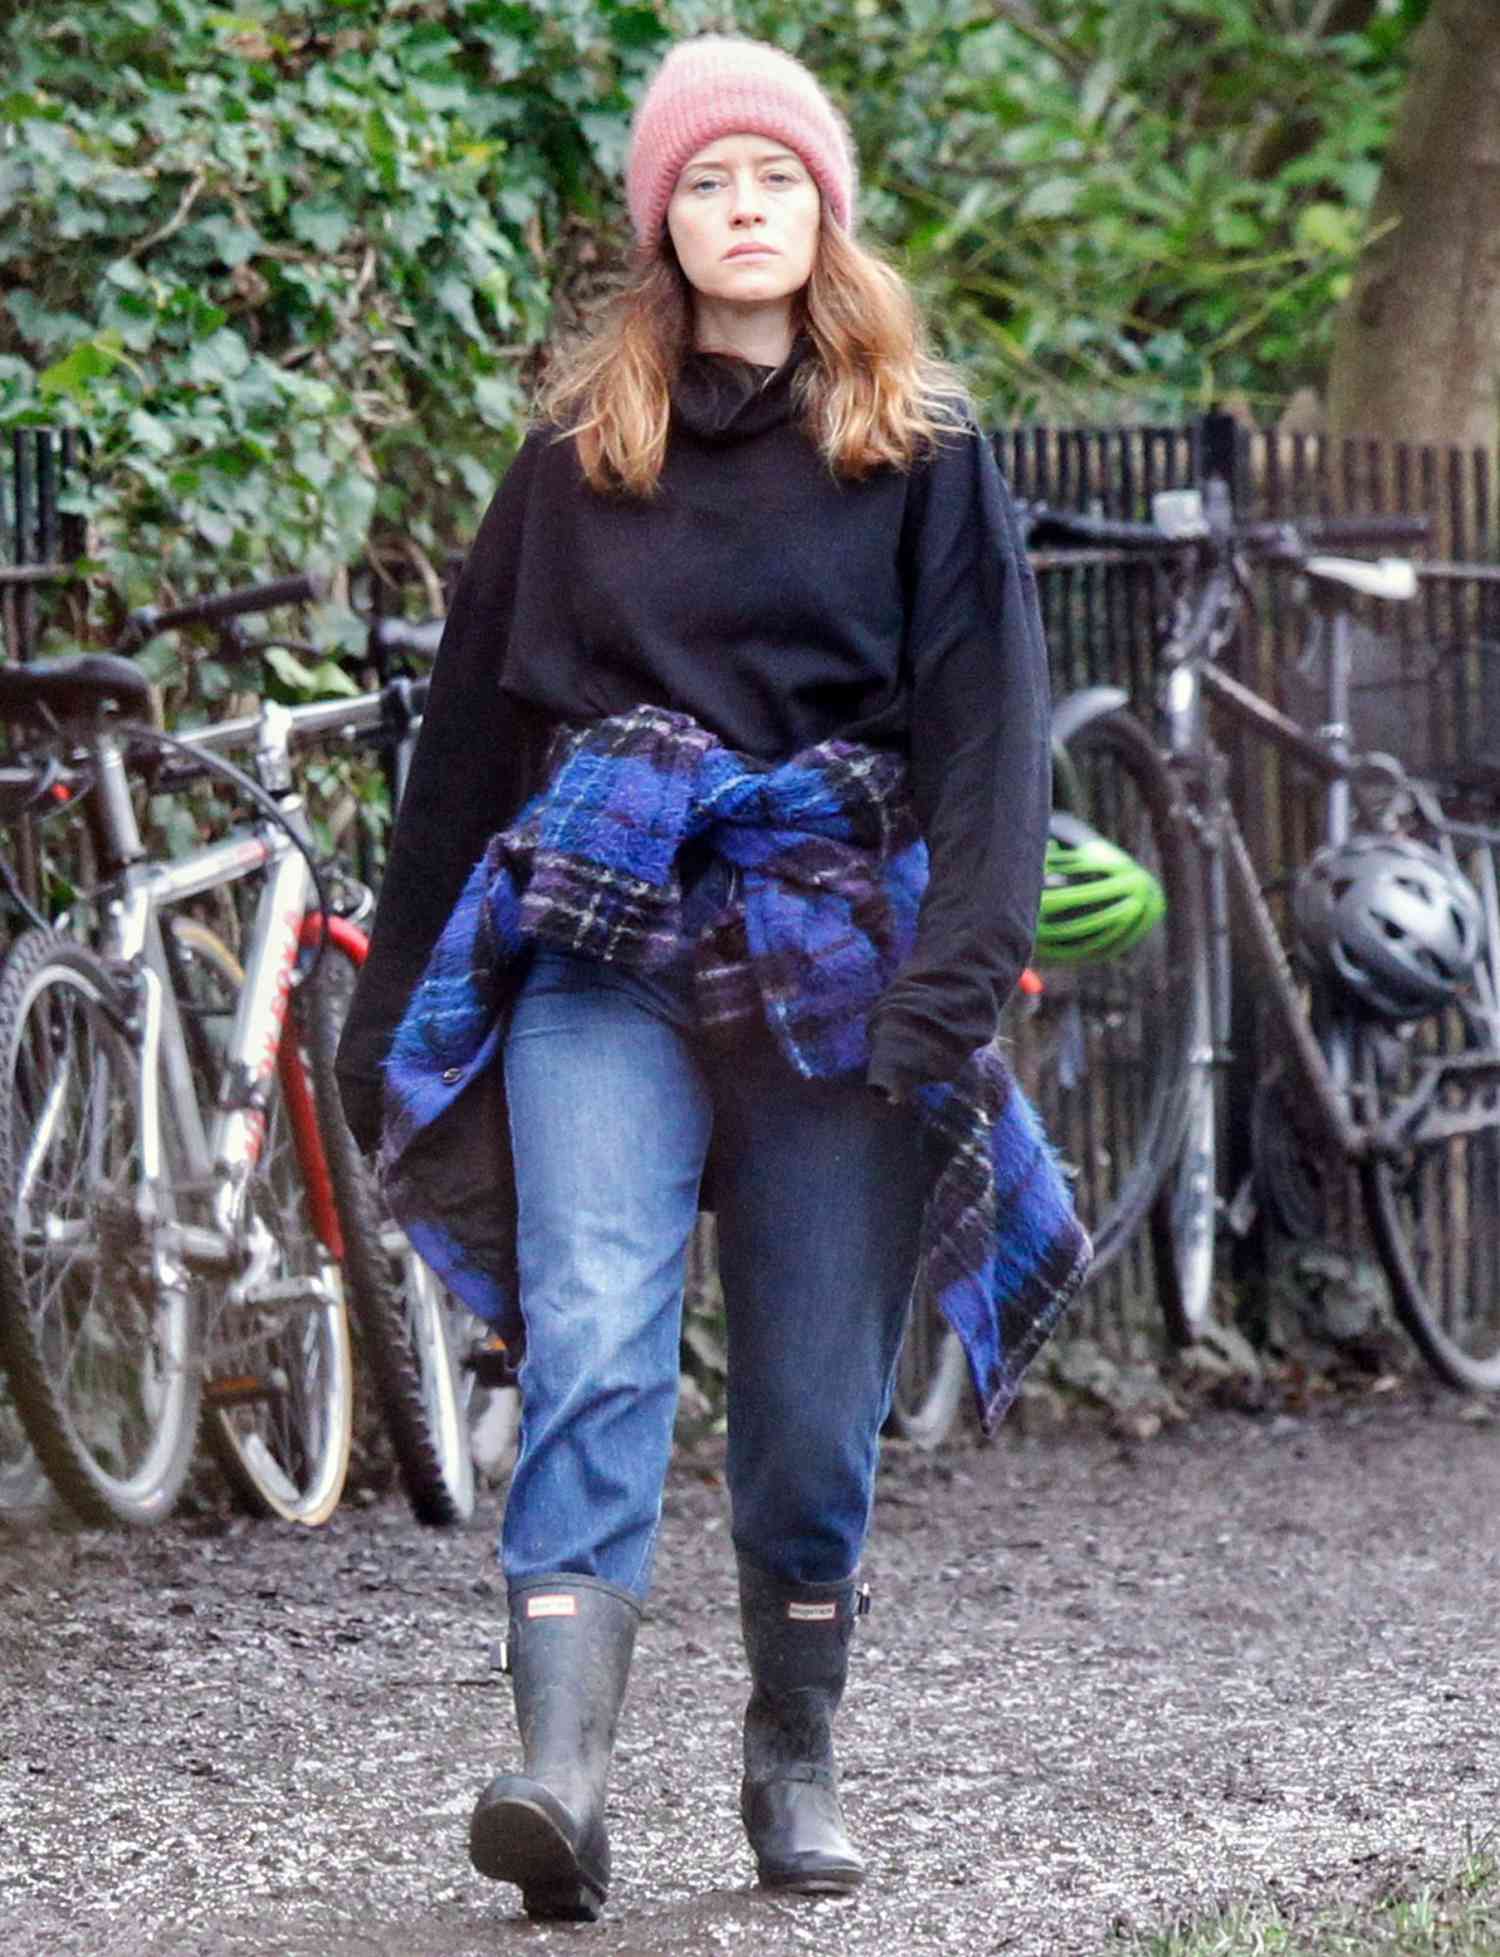 Actress Claire Foy Goes For A Soggy London Stroll Wearing A Pair Of Hunter Wellington Boots.